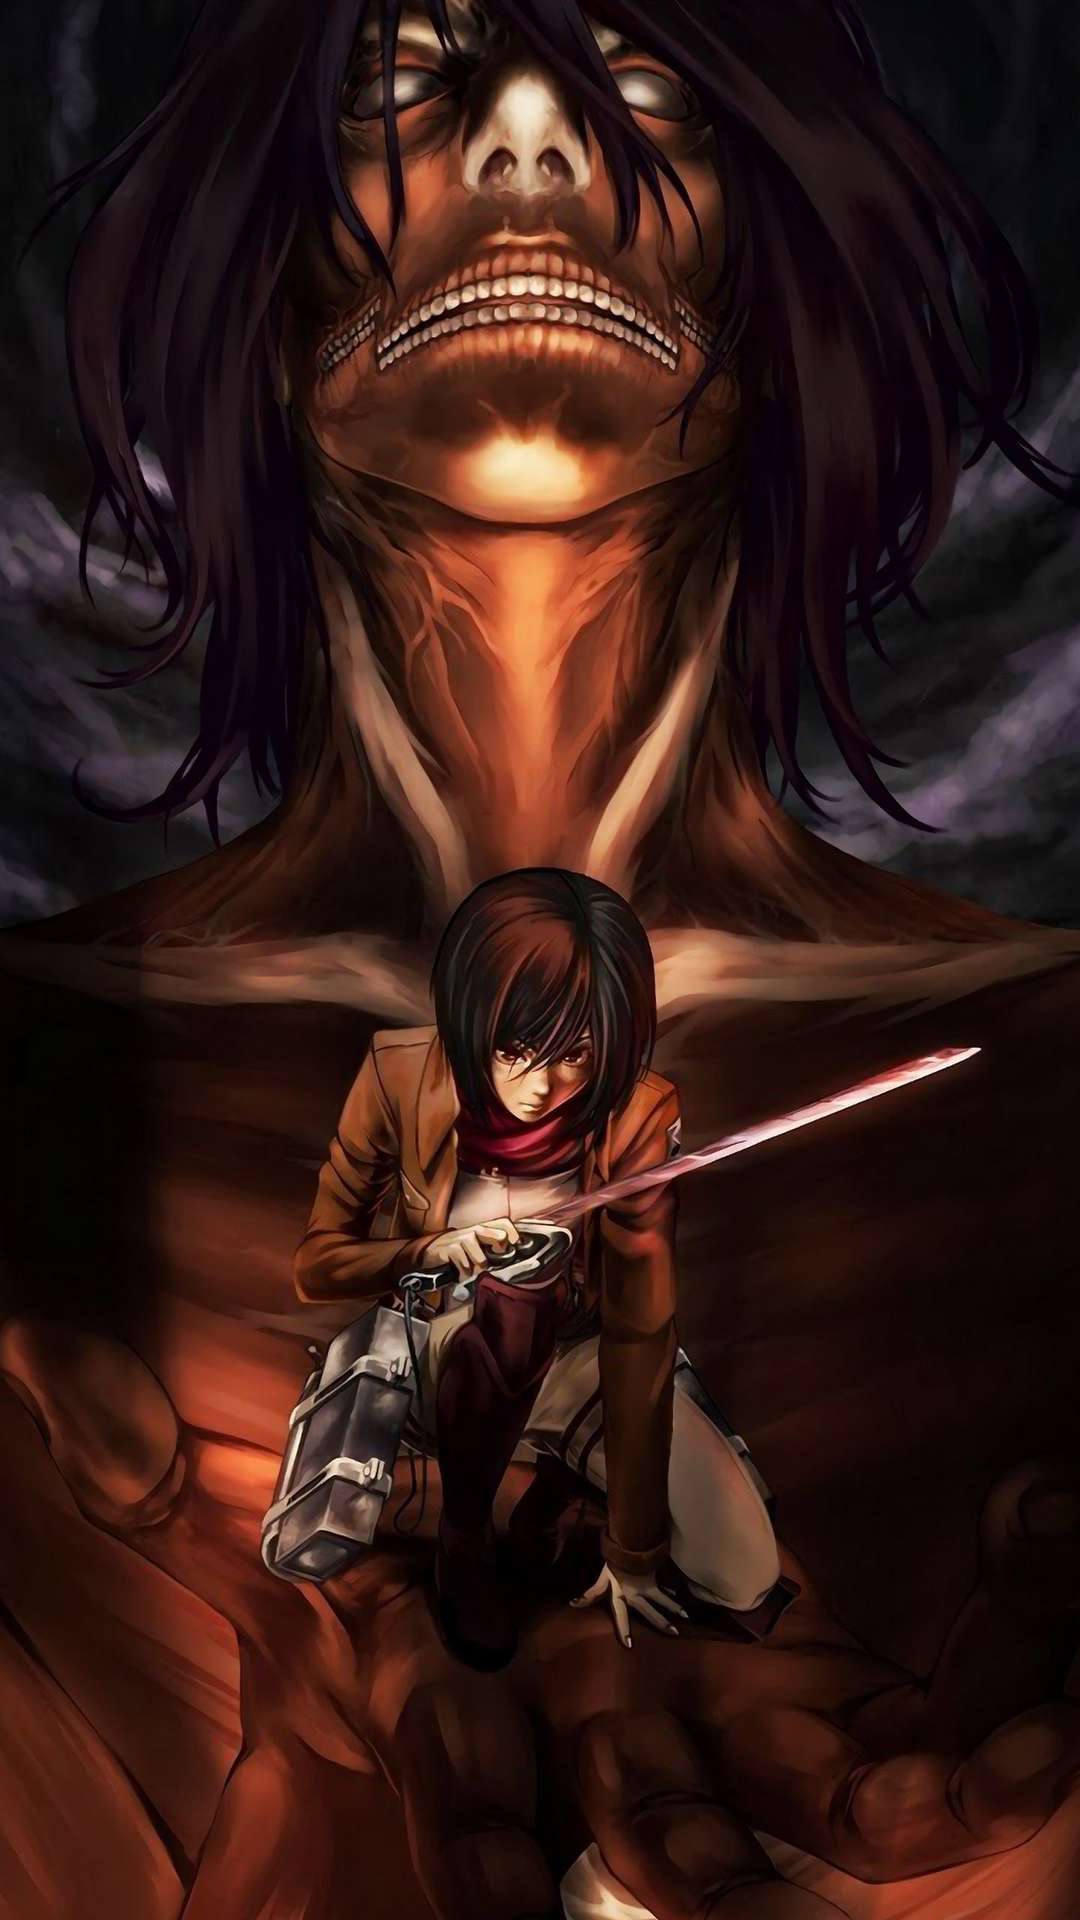 50 Mikasa Ackerman Wallpapers For Iphone And Android By Chelsea Reed